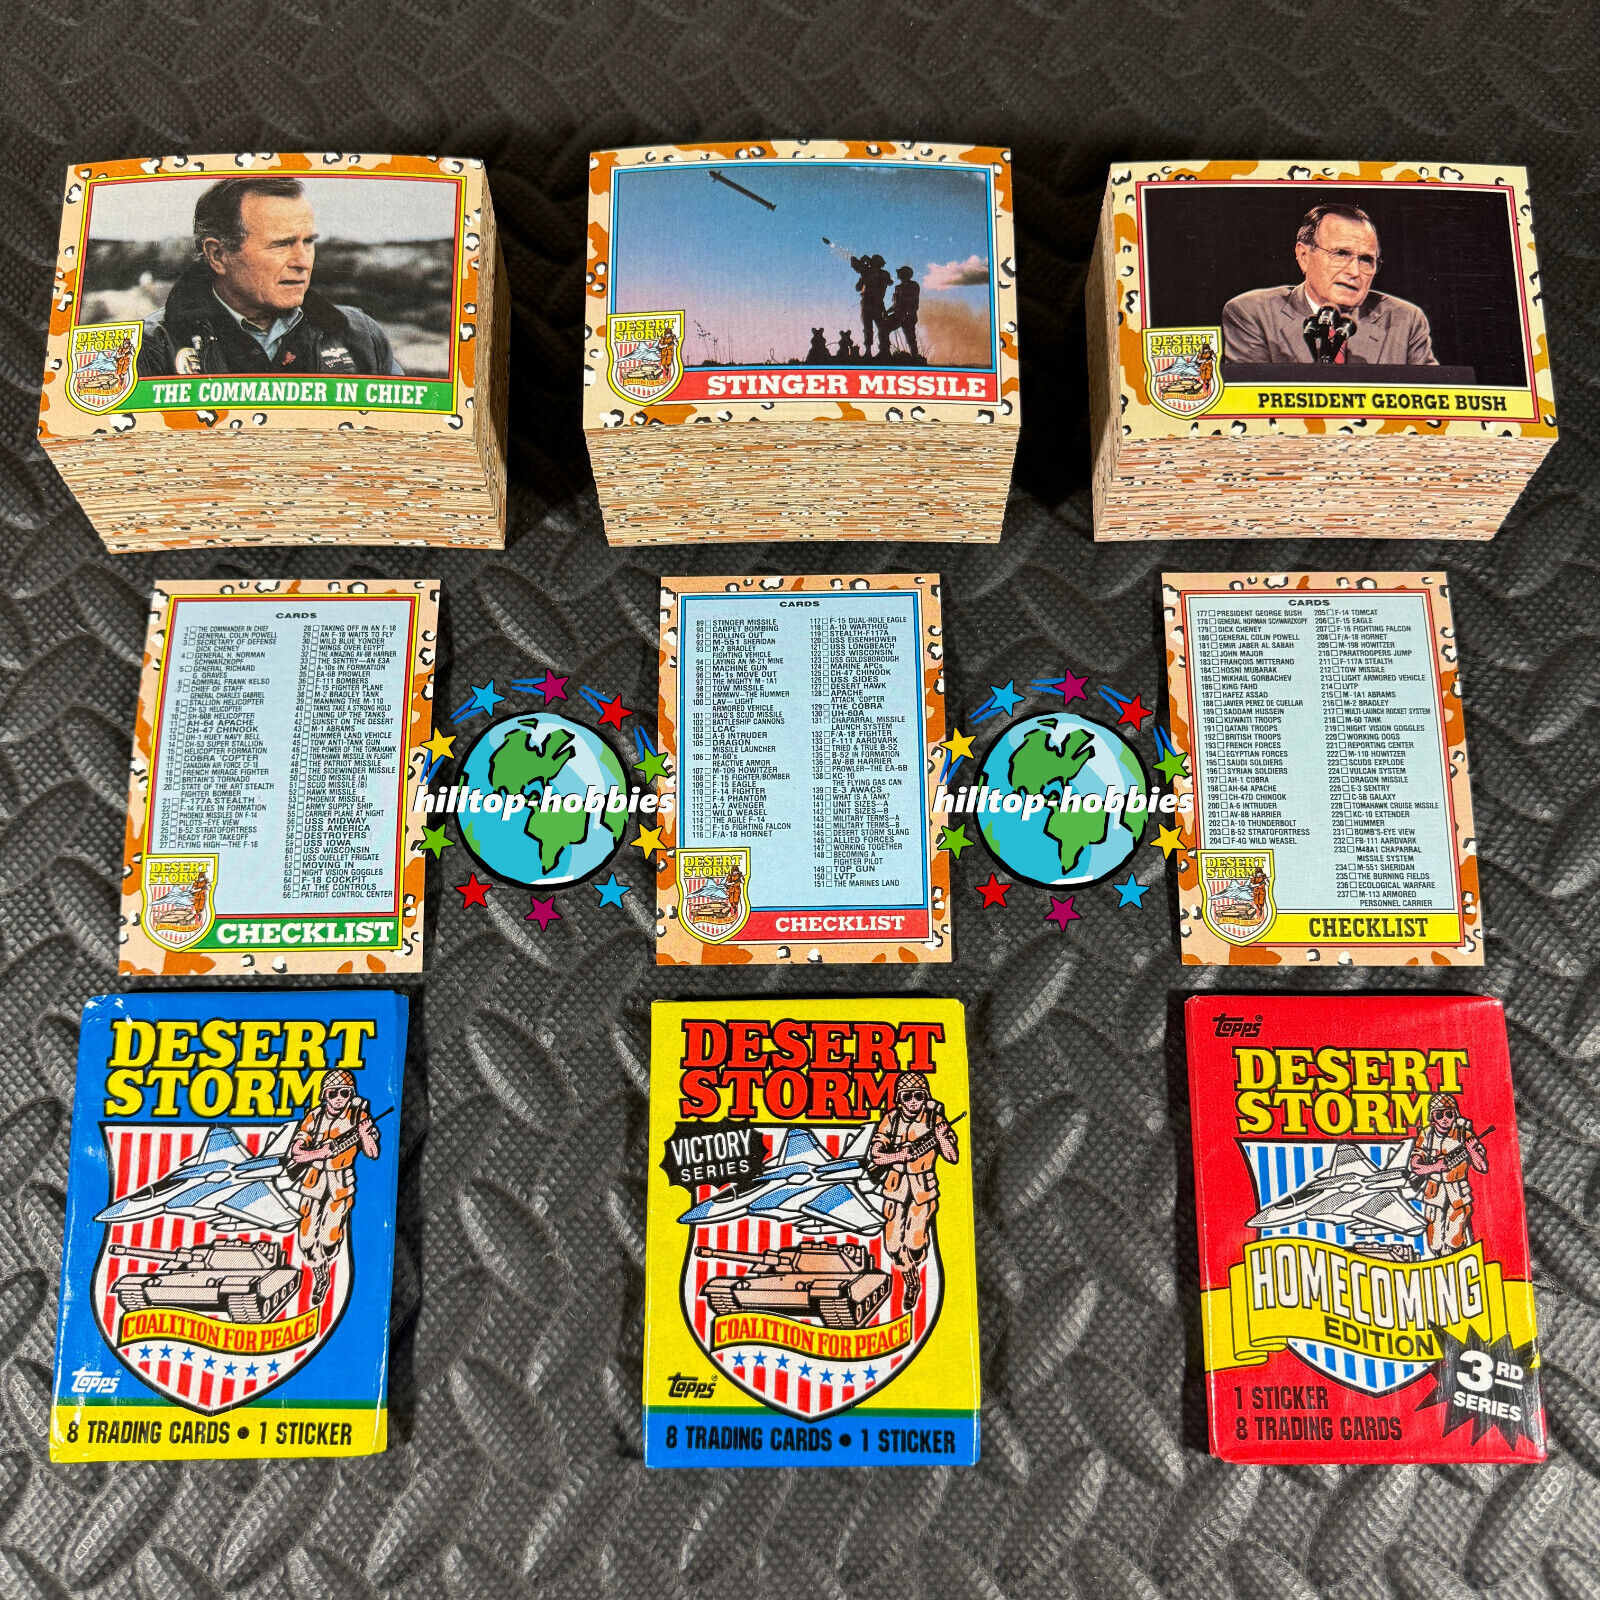 1991 TOPPS DESERT STORM 264-CARD SET +3-WRAPPERS SERIES 1,2,3 VICTORY/HOMECOMING